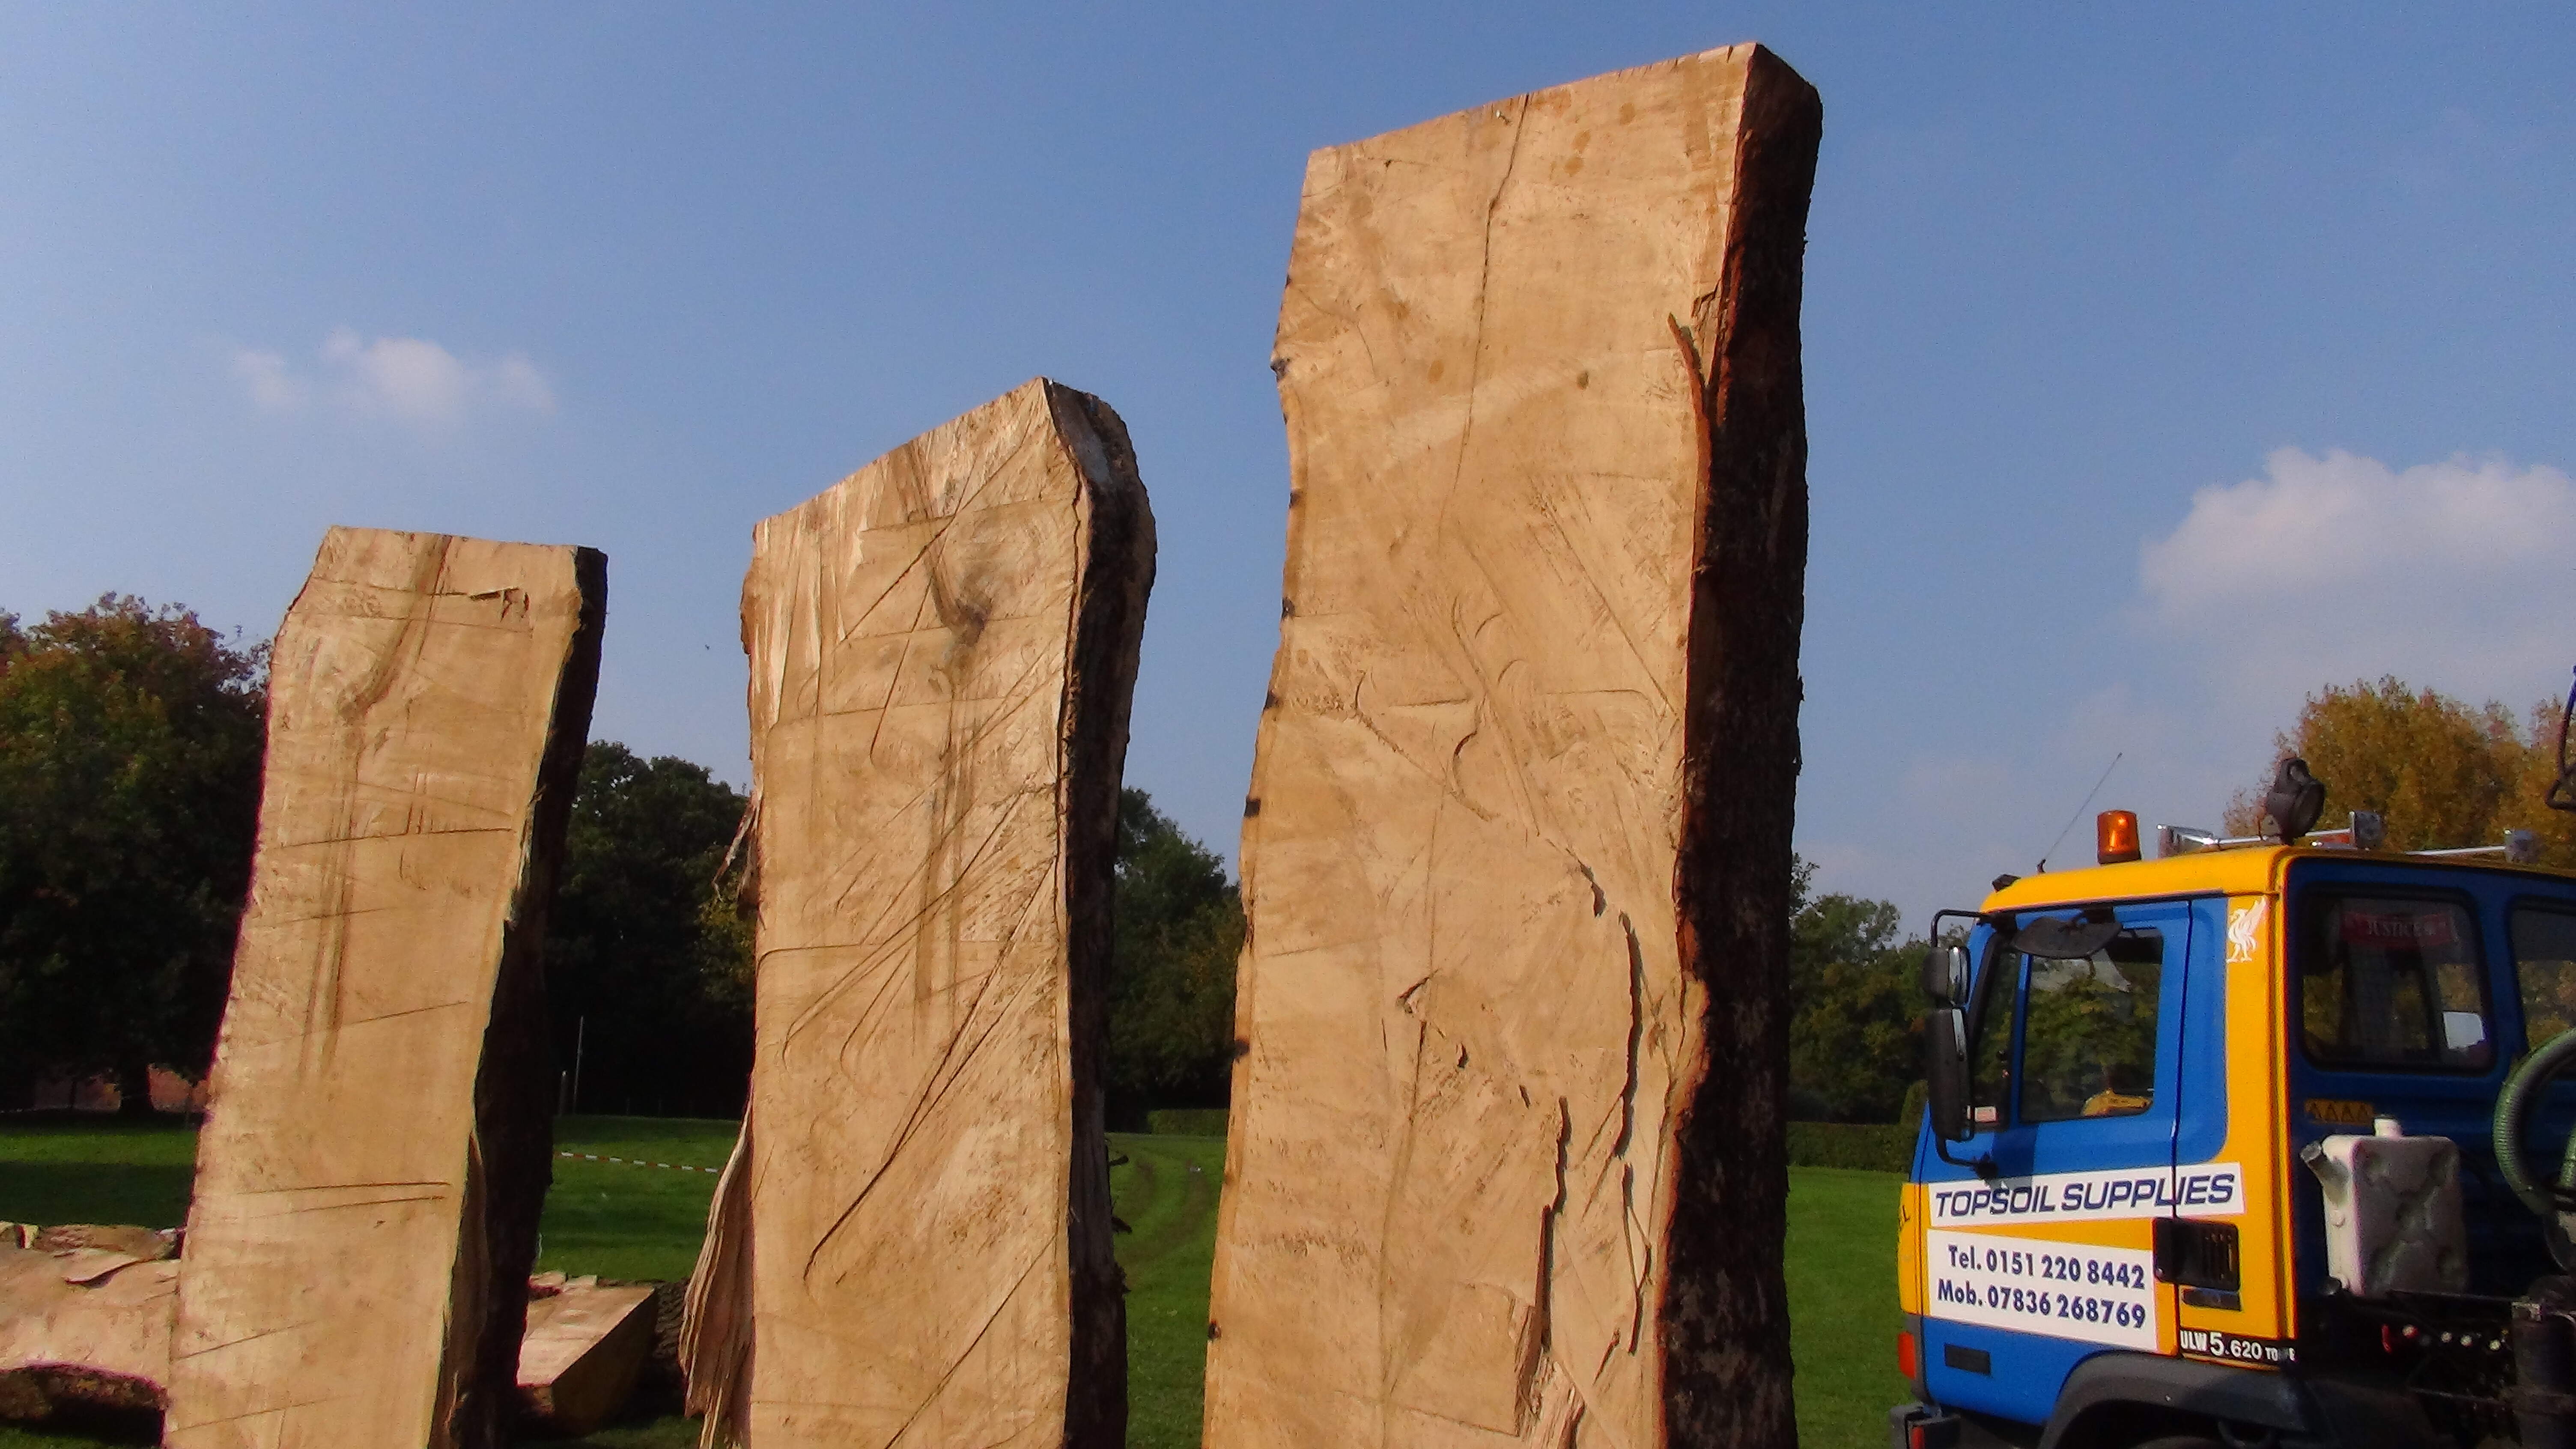 The henge being built